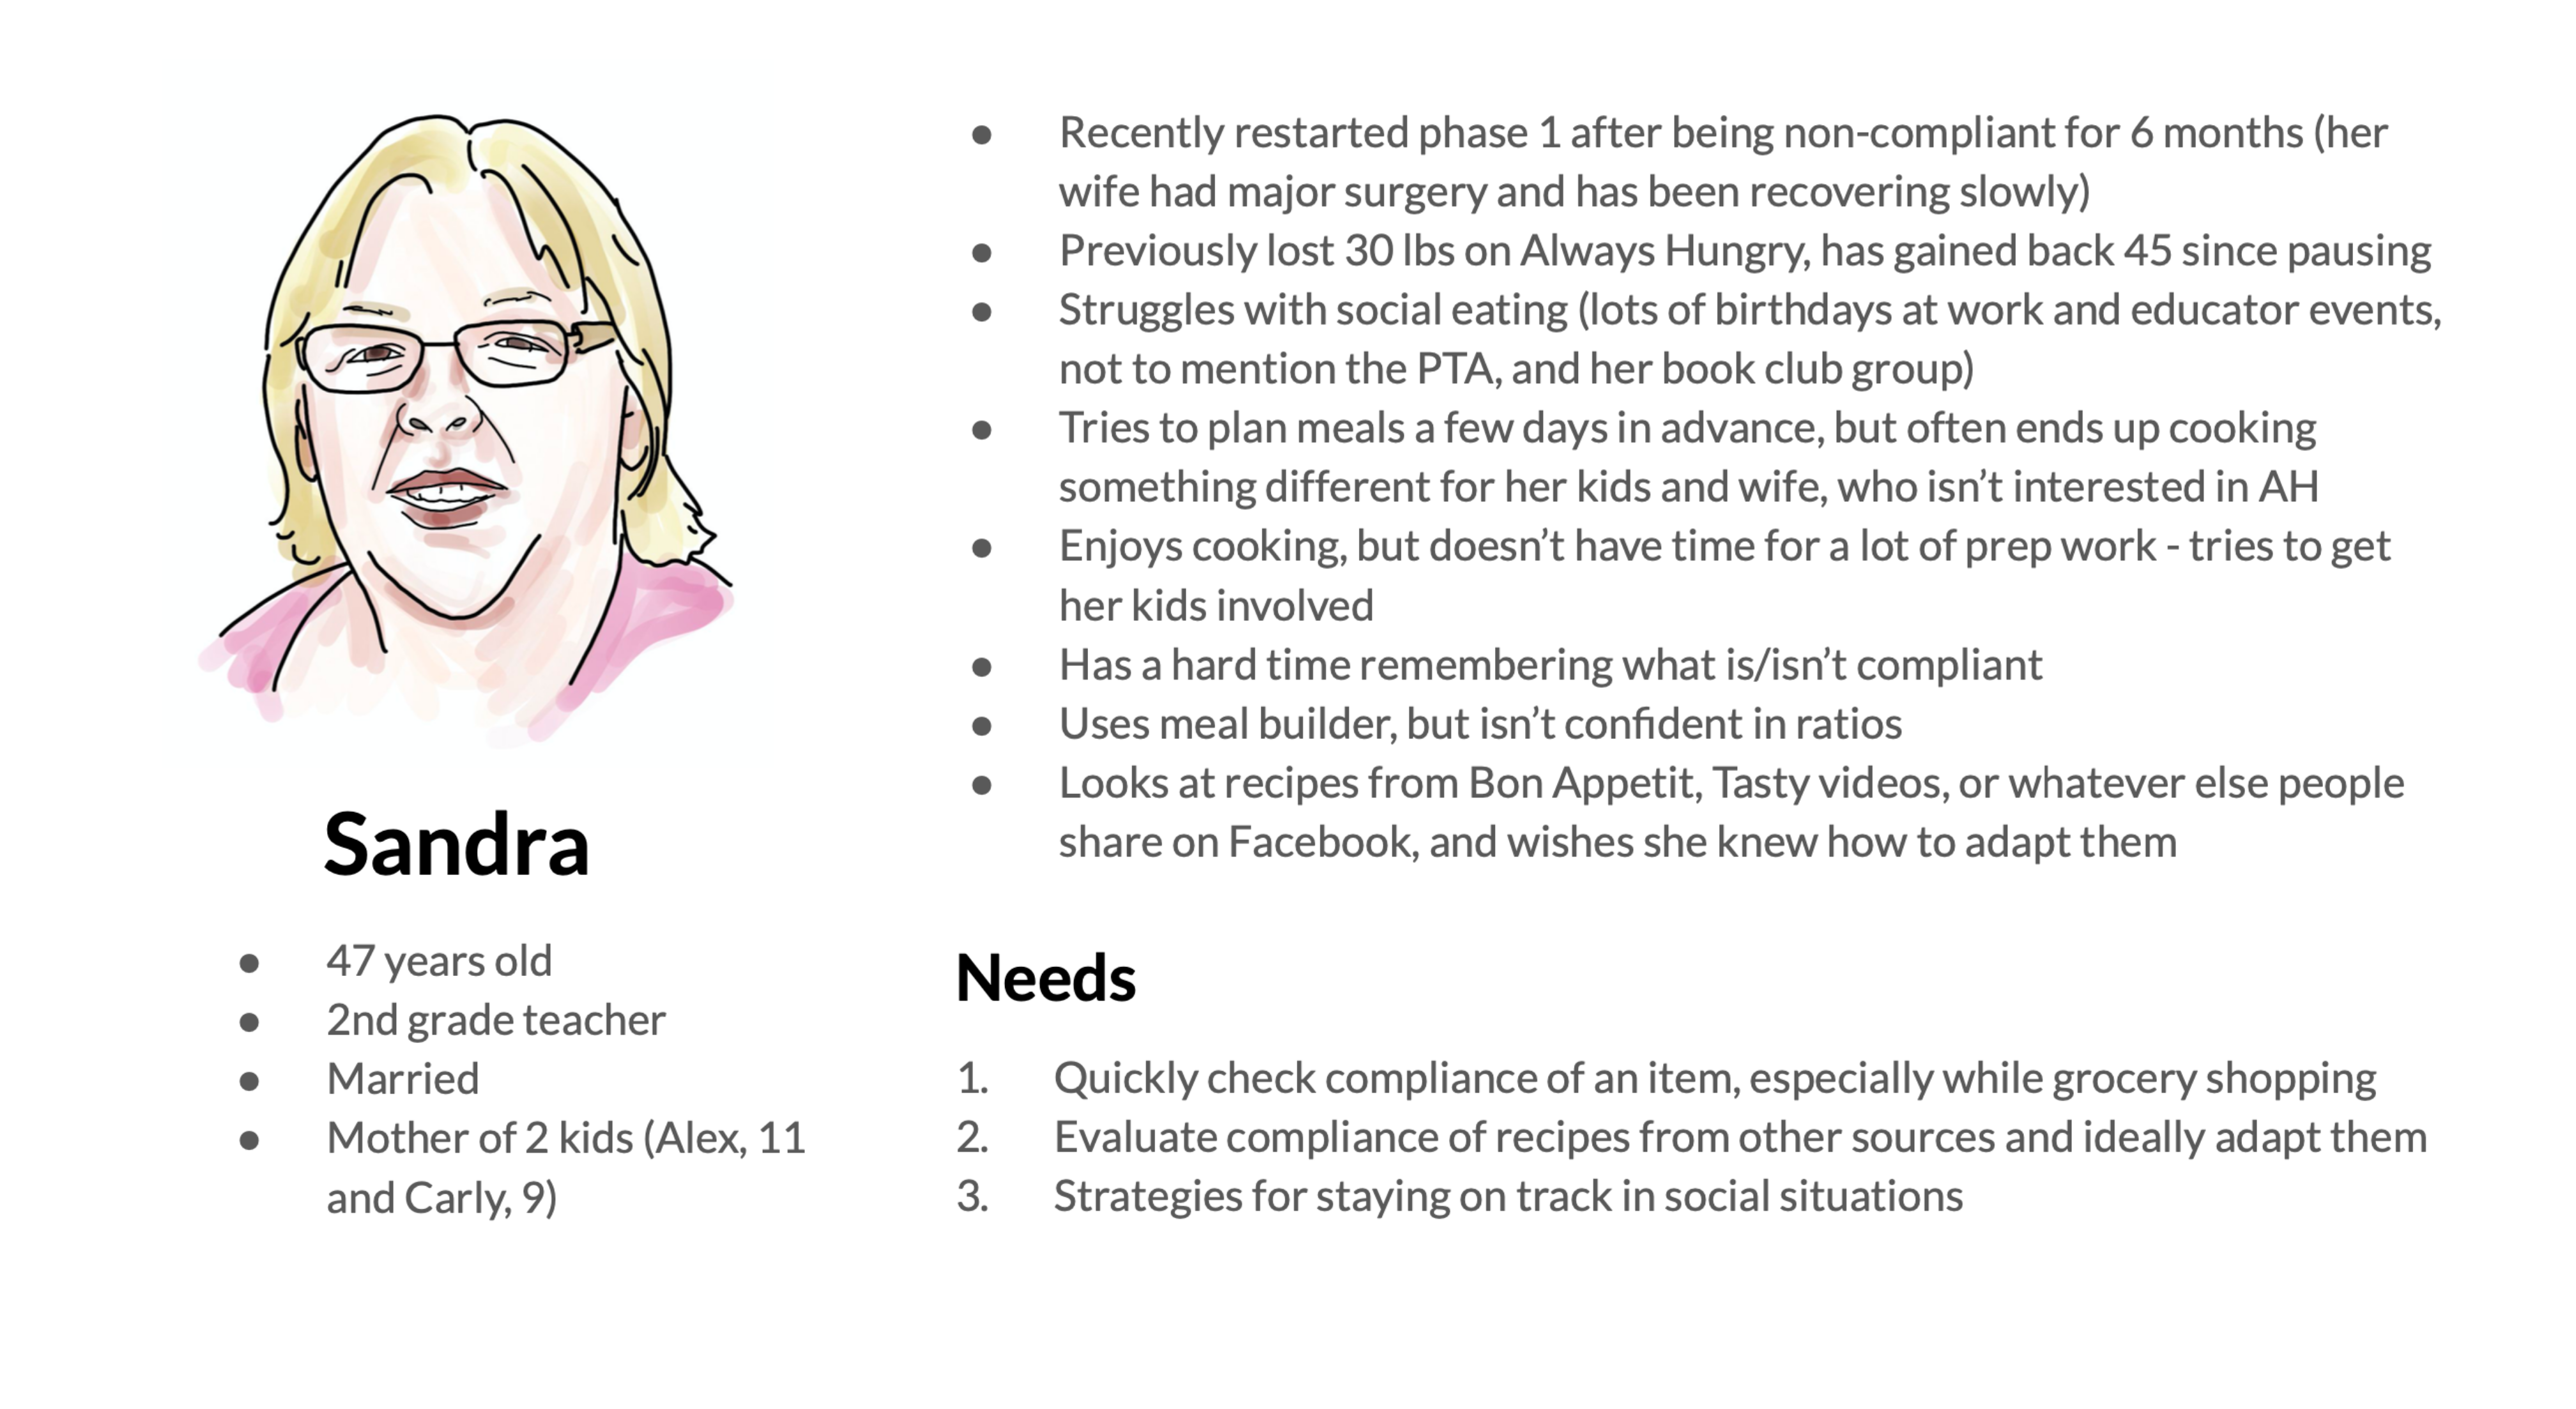 Persona for Sandra. She is 47 years old, 2nd grade teacher, Married, Mother of 2 kids (Alex, 11
                    and Carly, 9). Recently restarted phase 1 after being non-compliant for 6 months. She needs help quickly evaluating items while grocery shopping